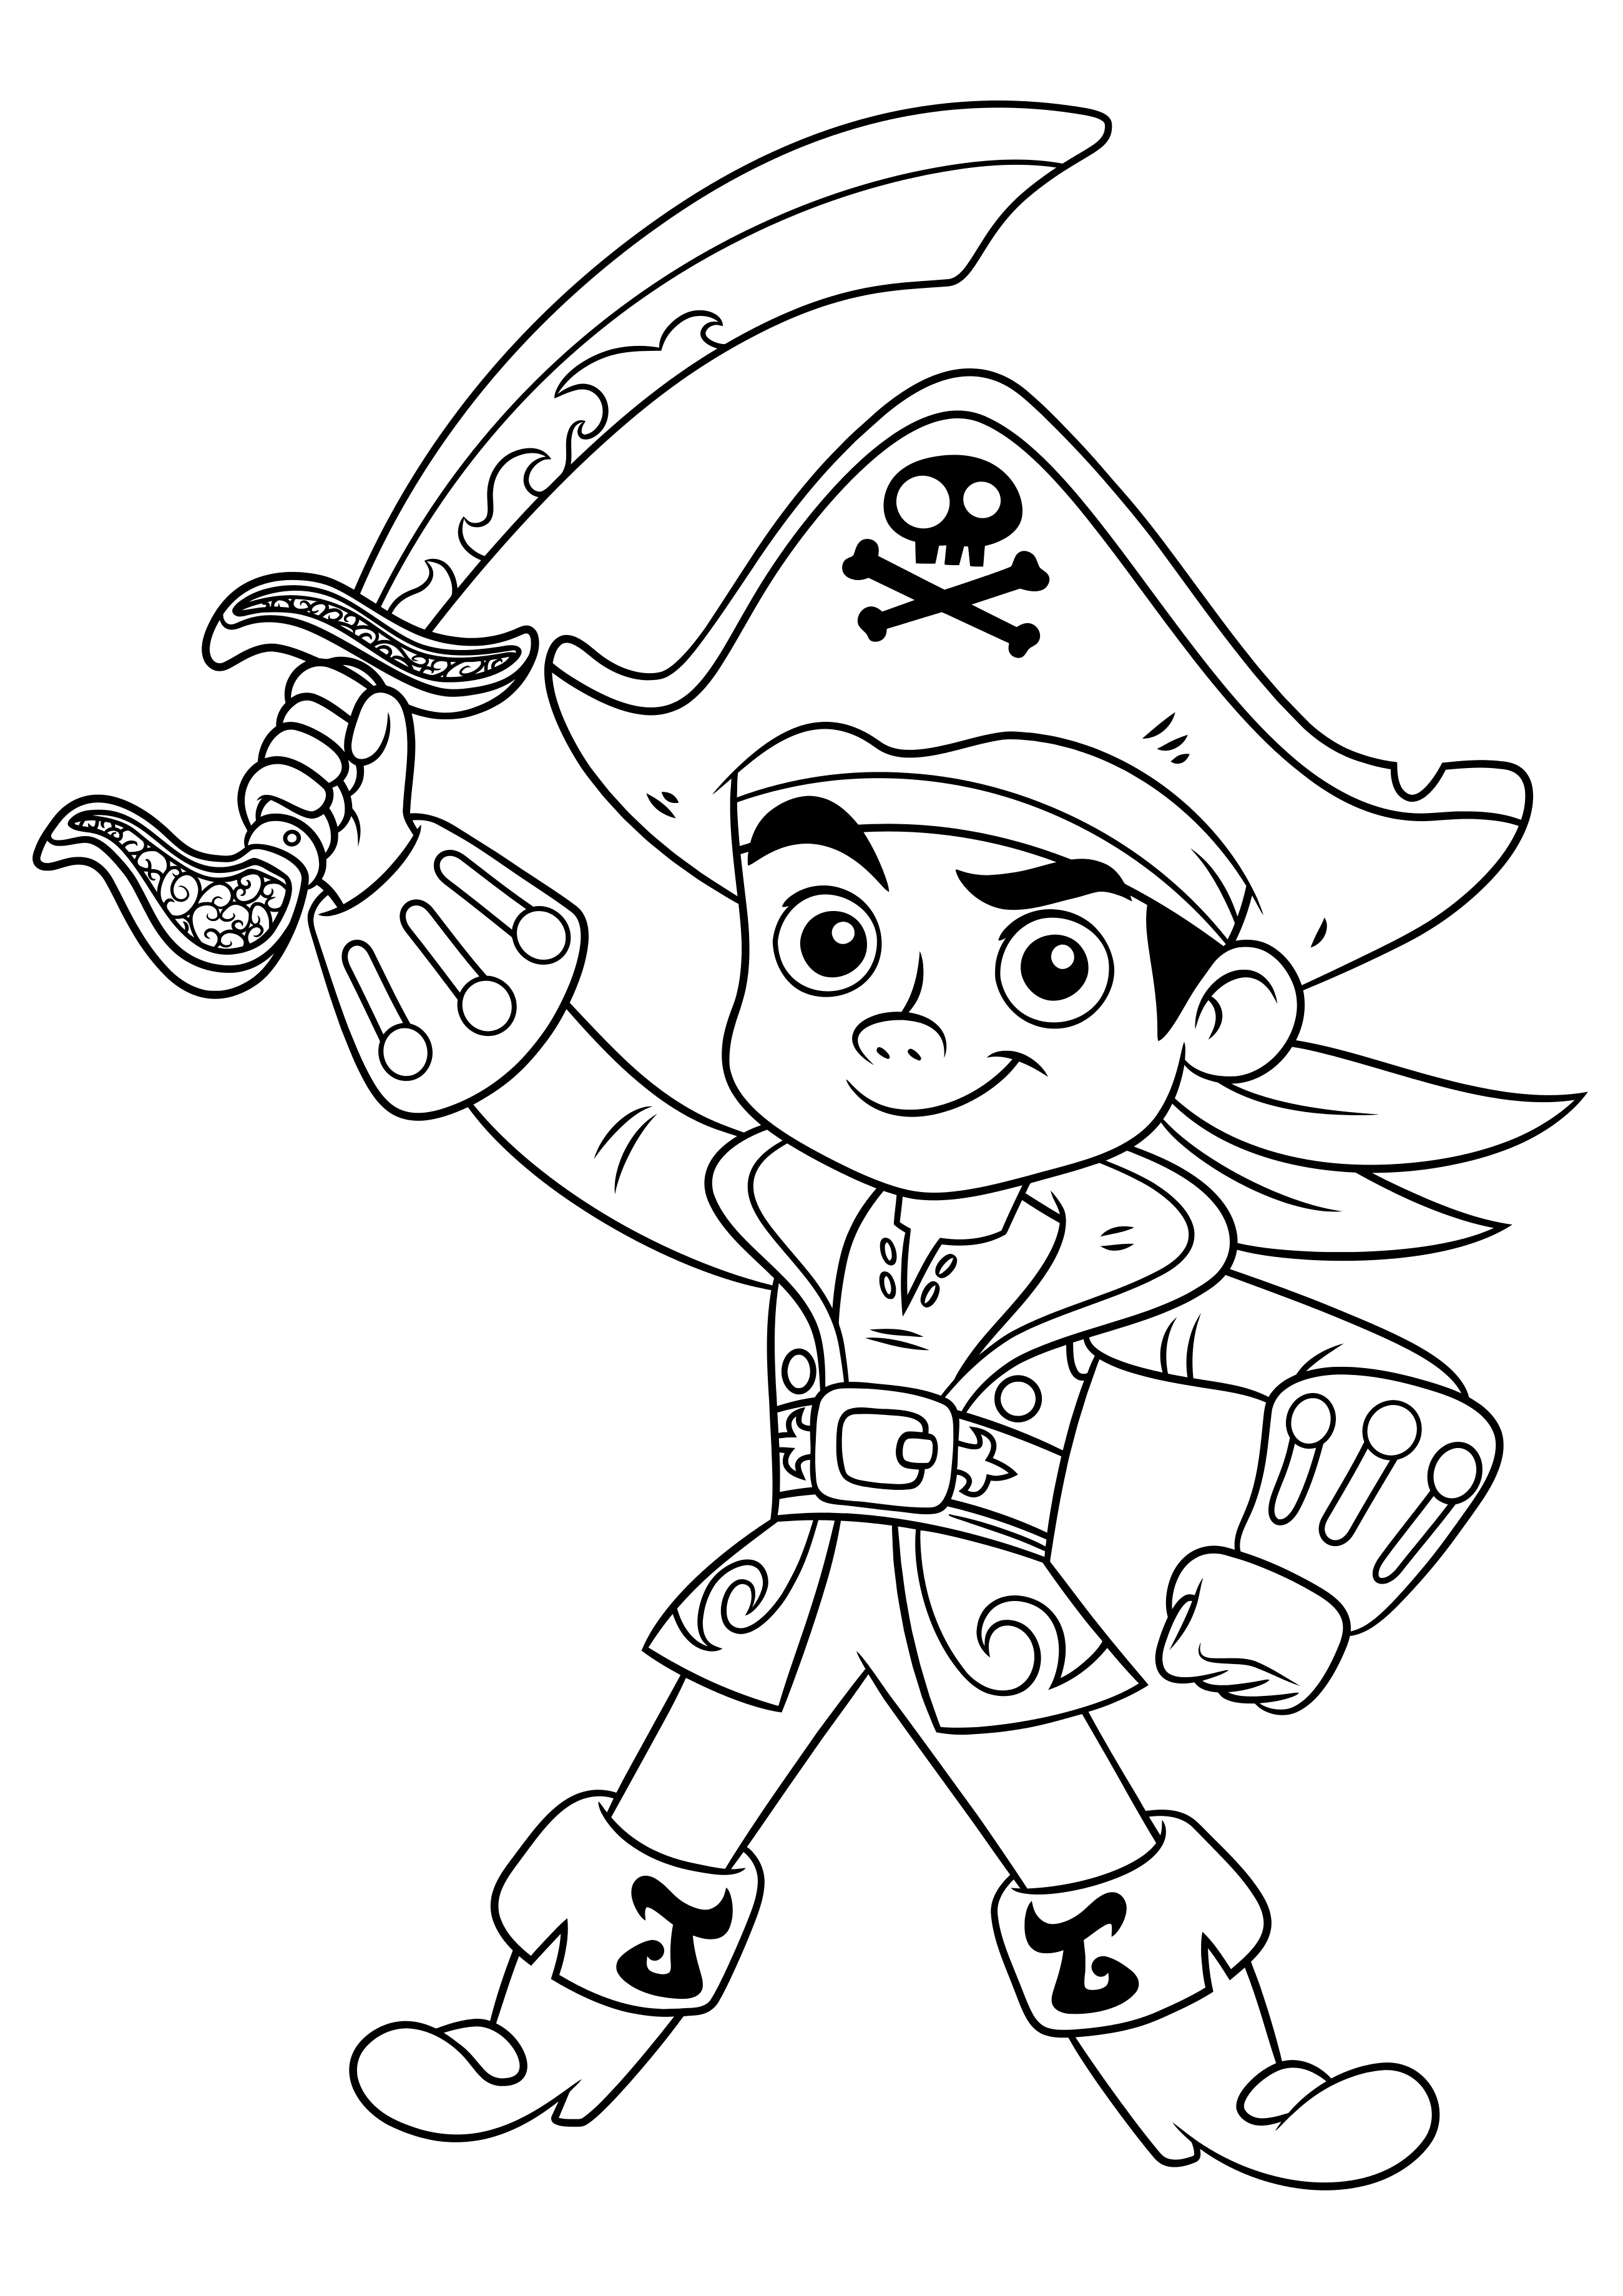 Coloring Pages Never Land Pirates - Printable